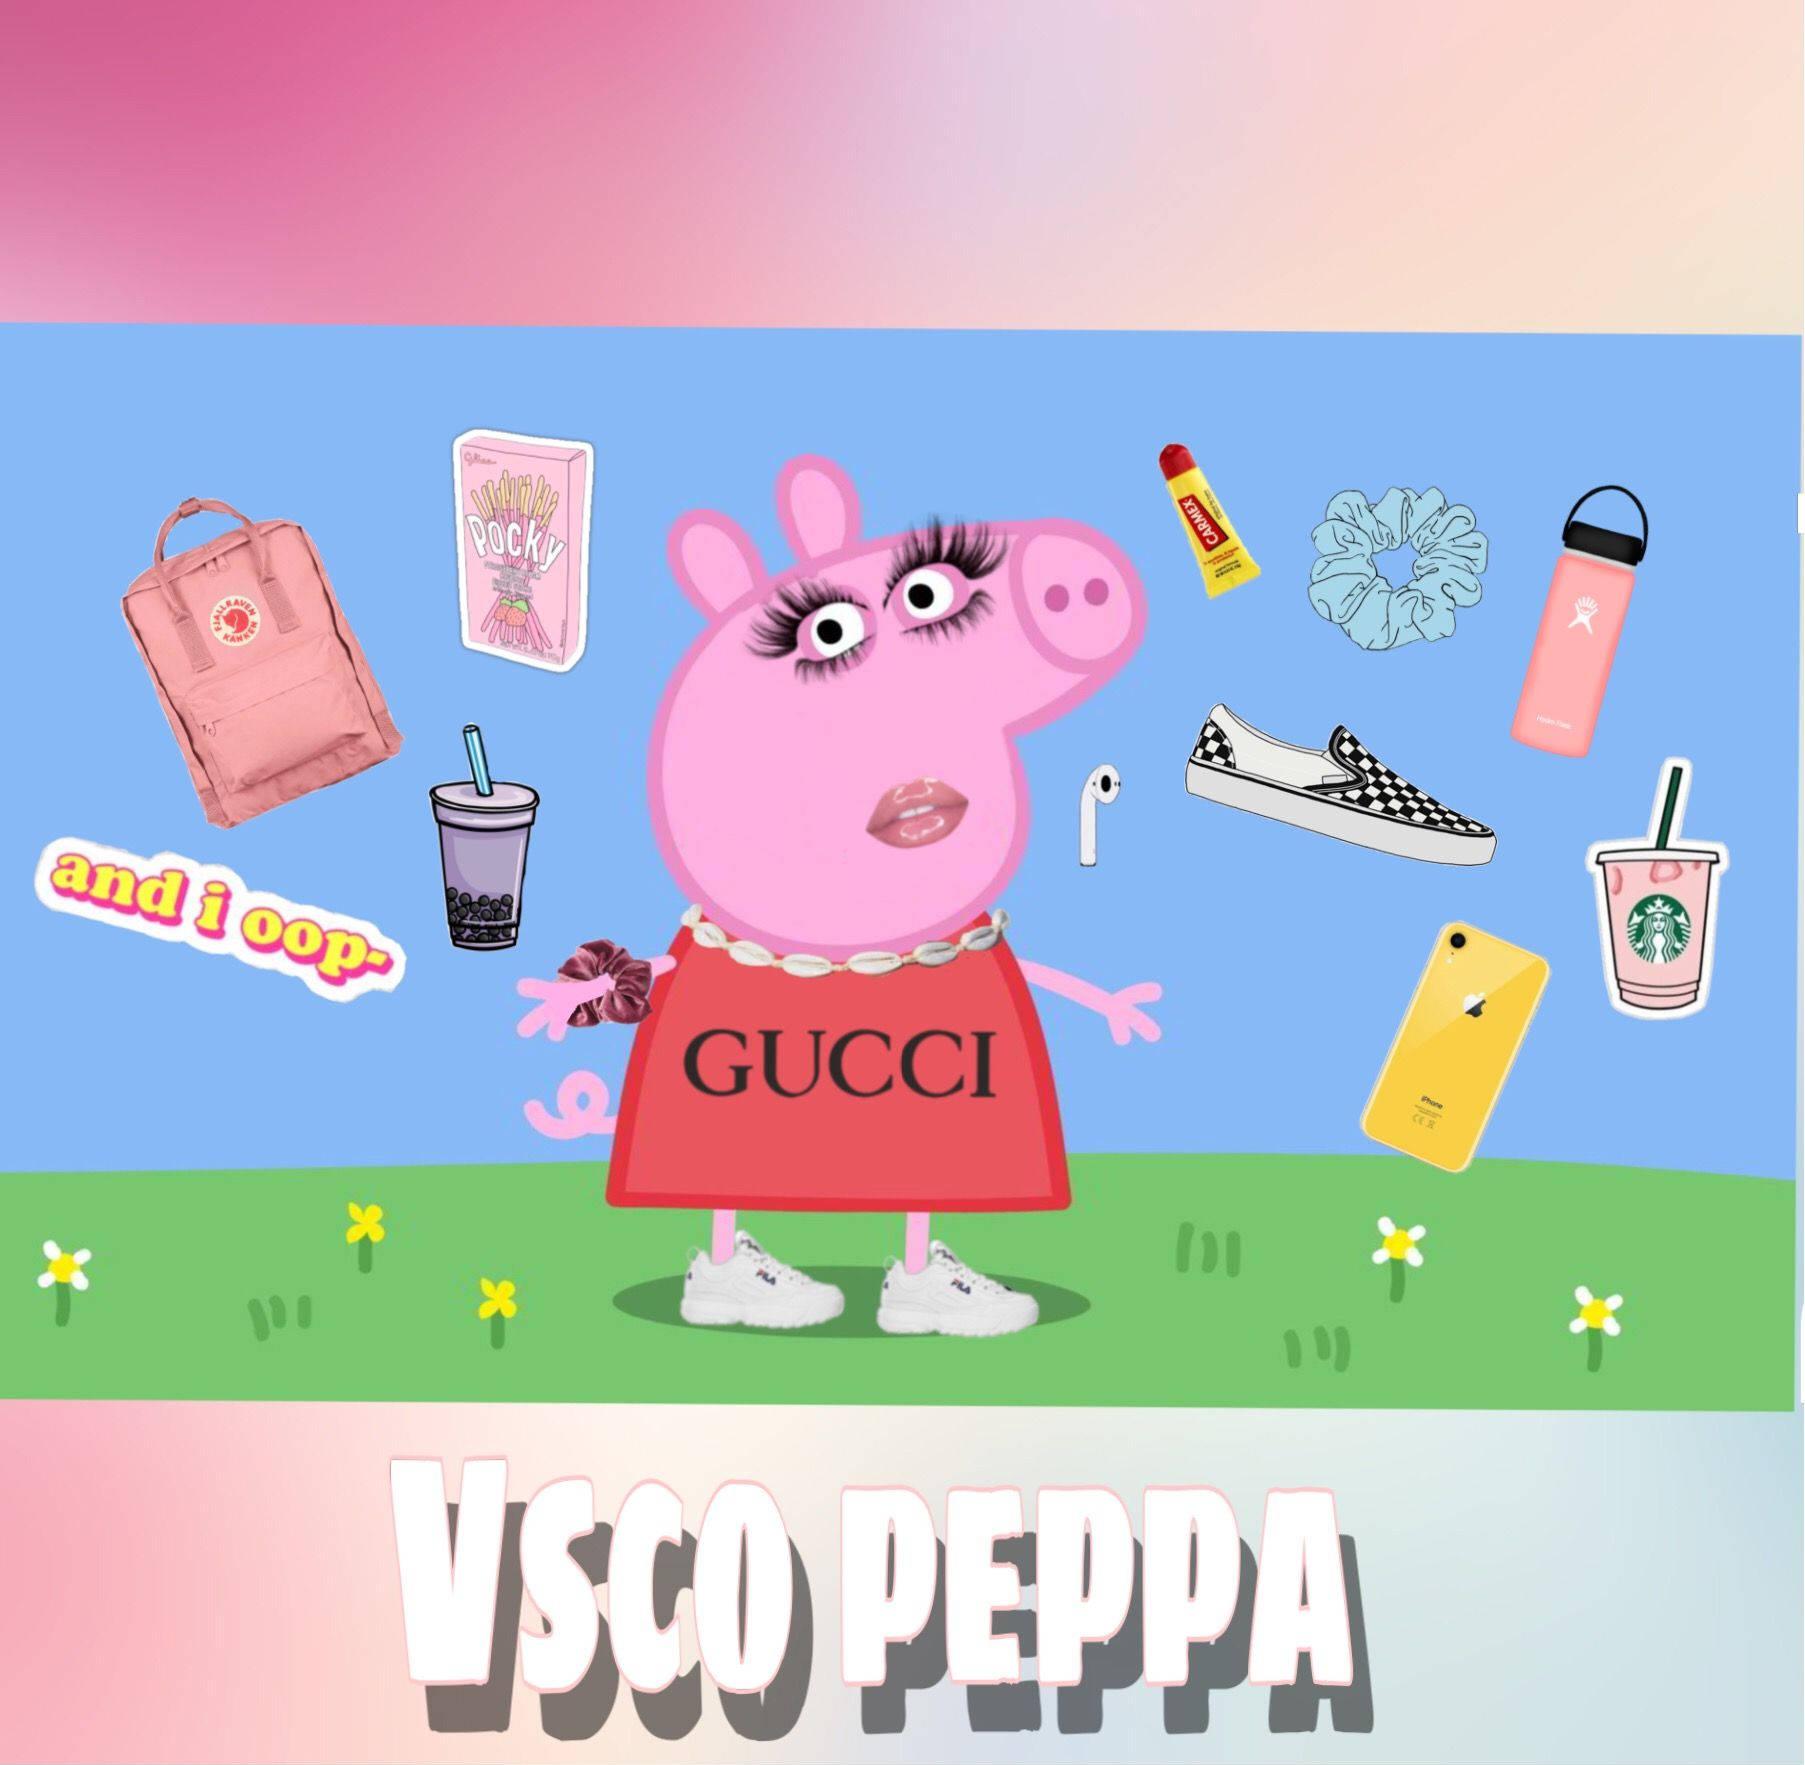 Baddie Peppa Pig Ready To Party Wallpaper